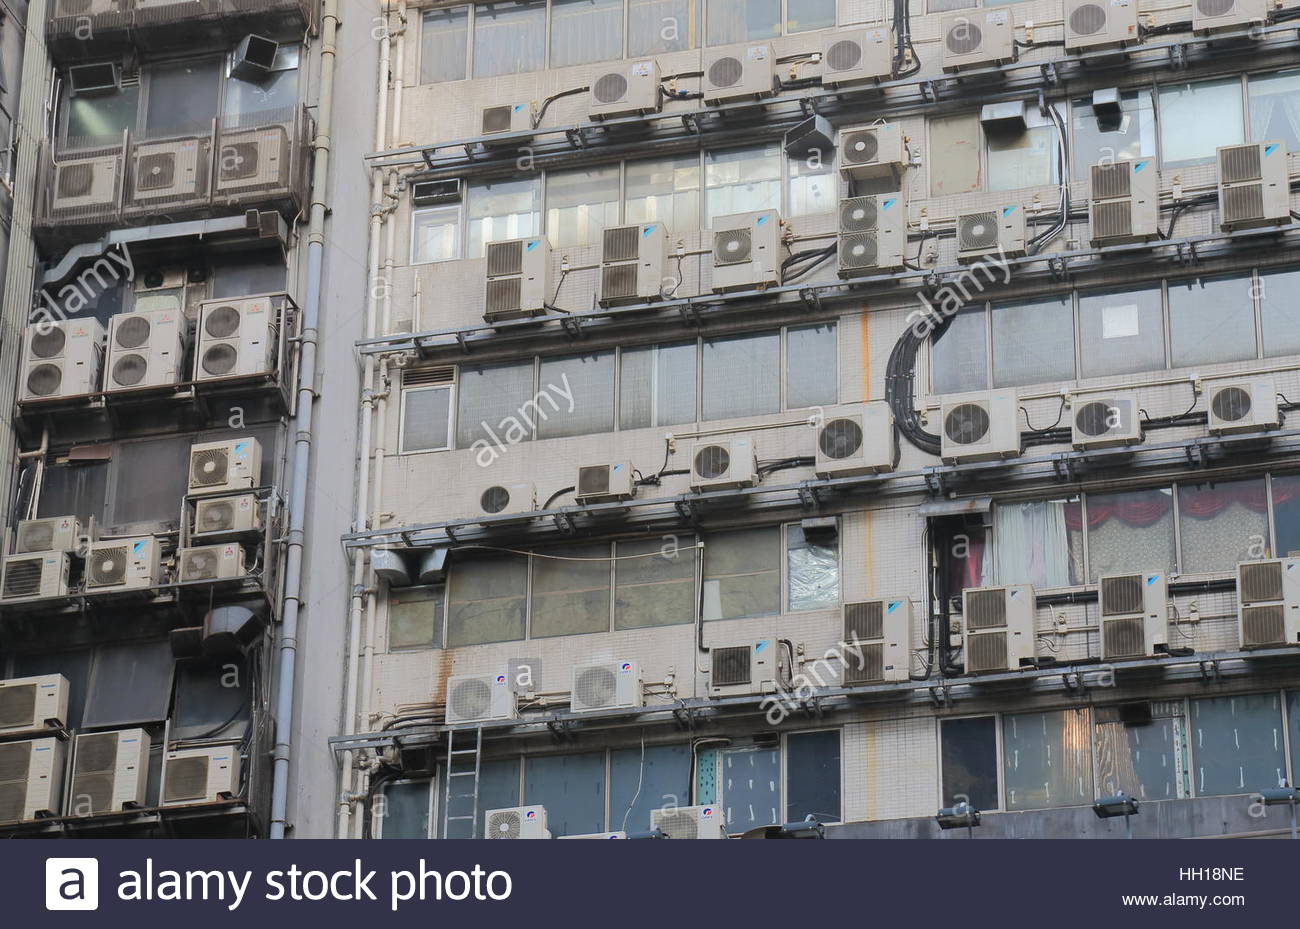 air-conditioning-unit-at-a-residential-apartment-building-in-hong-HH18NE.jpg